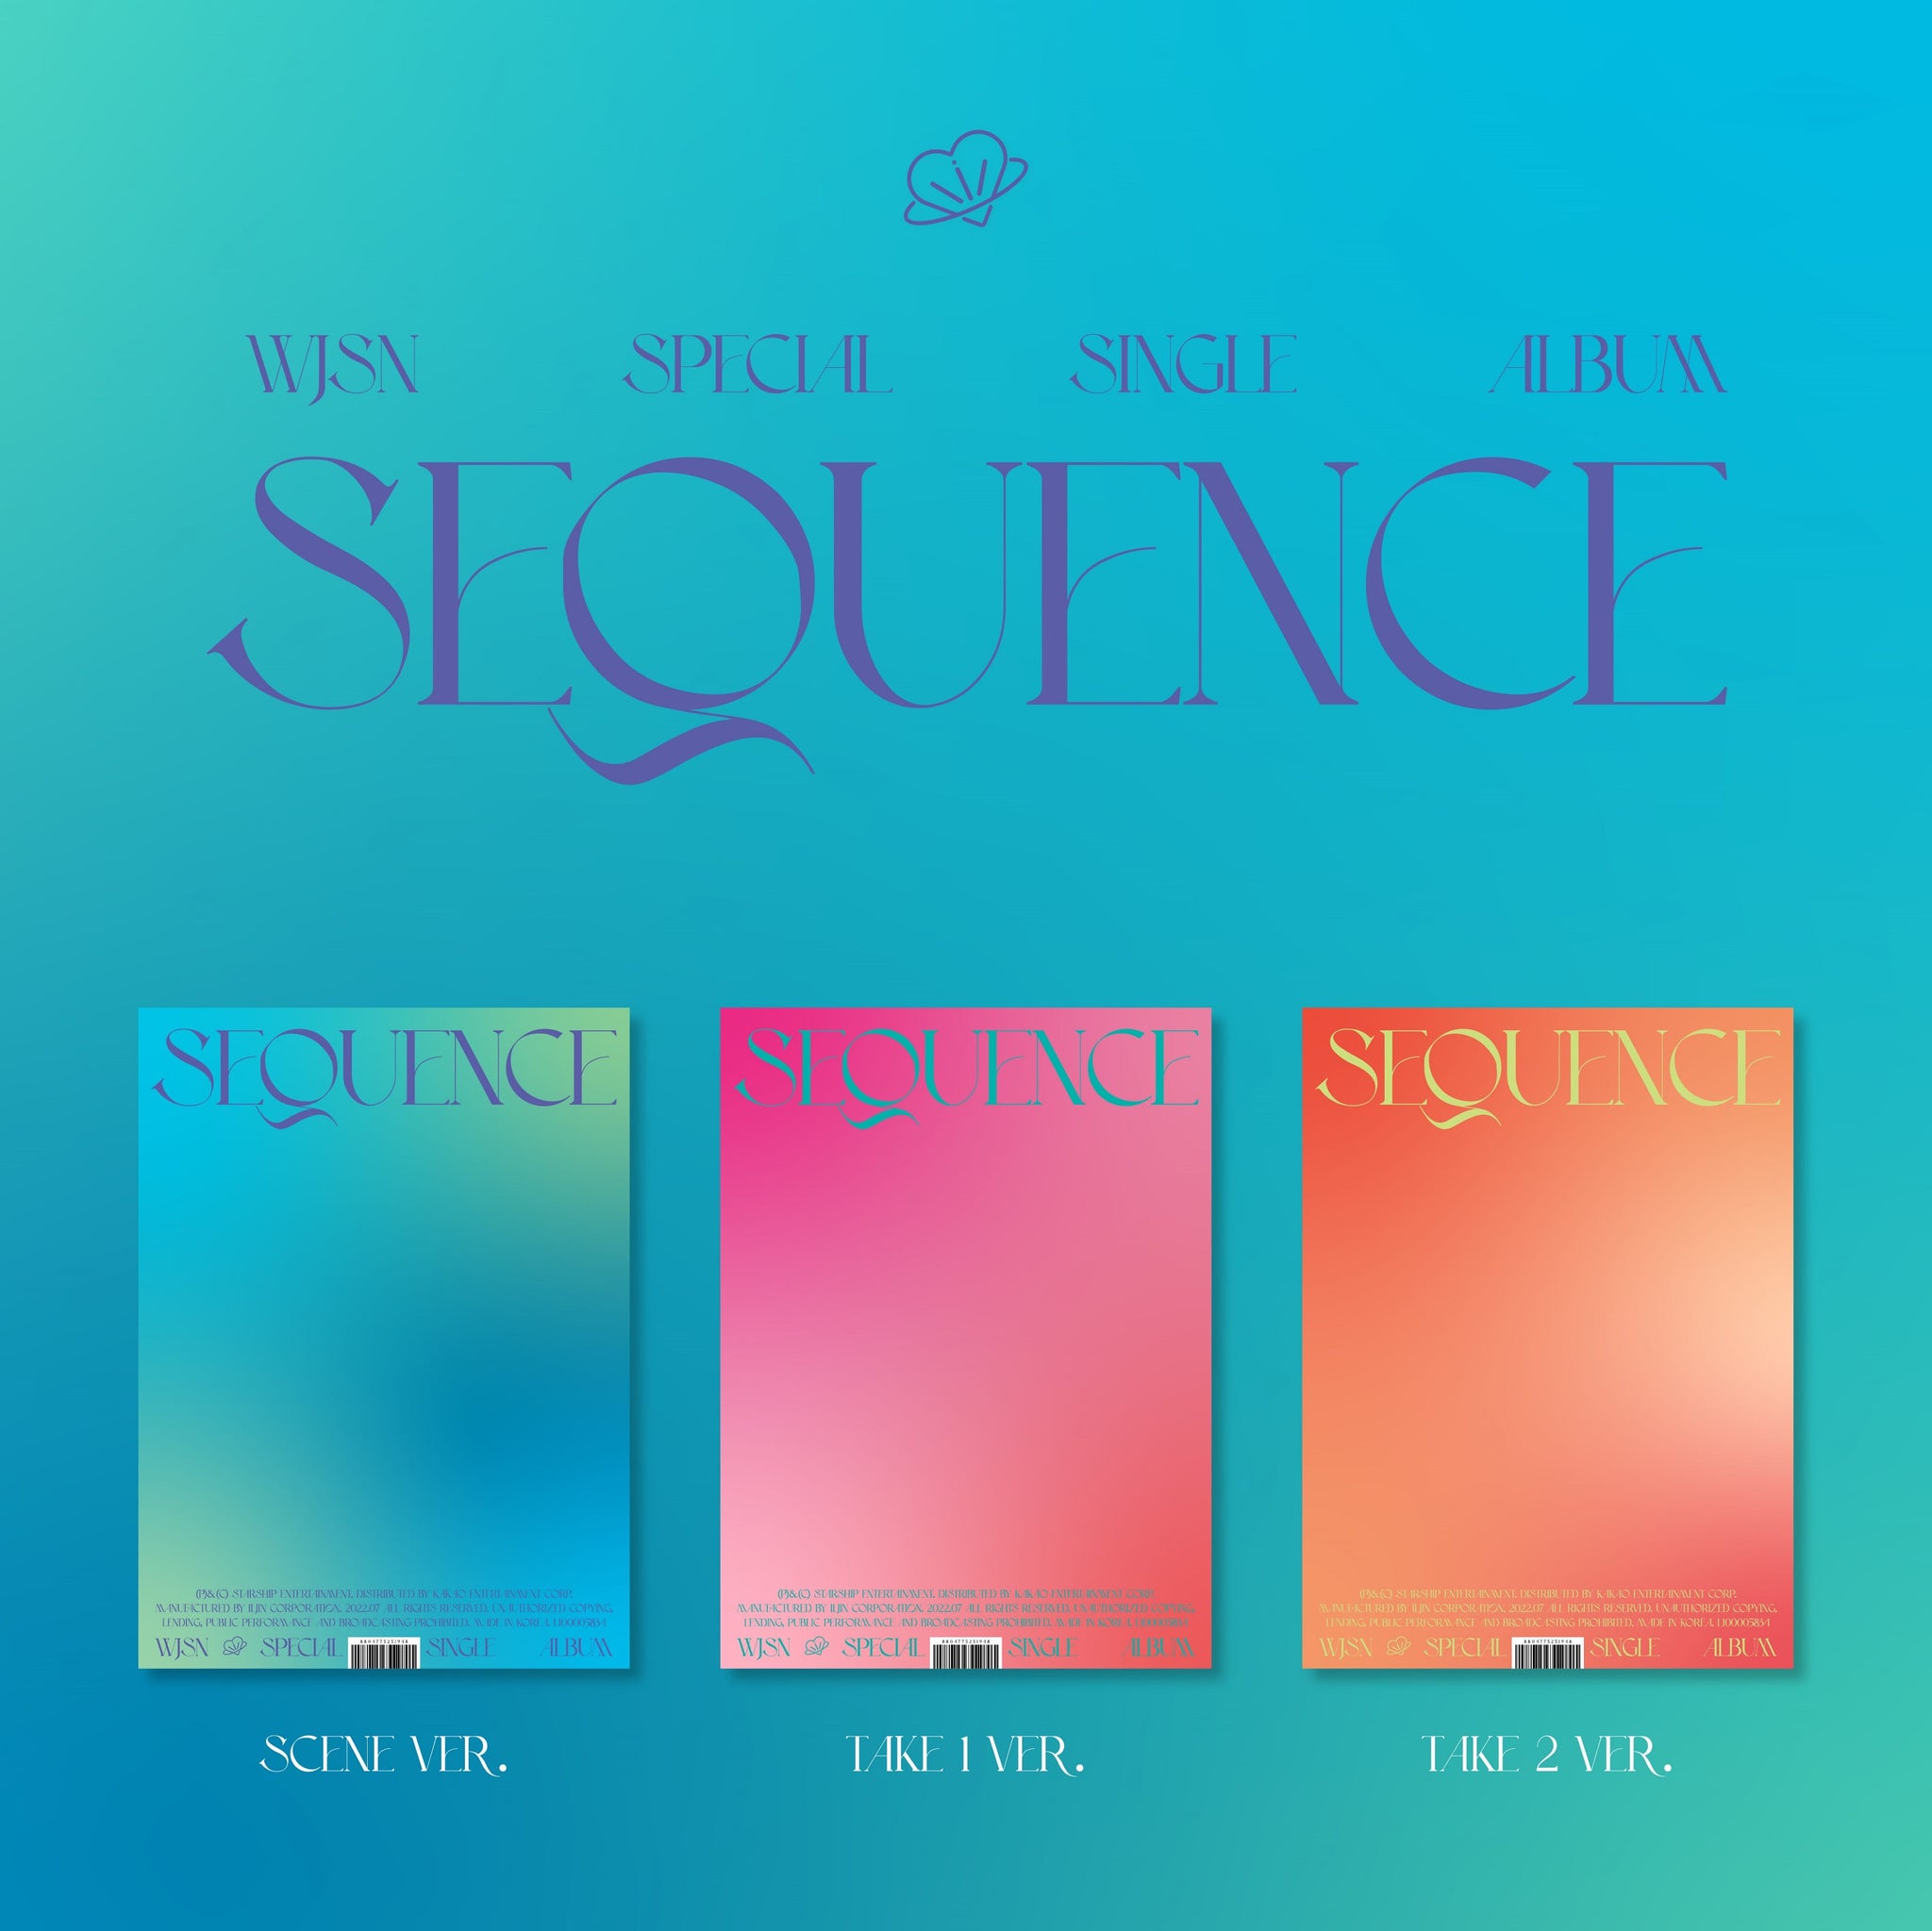 WJSN [Sequence] Special Single Album